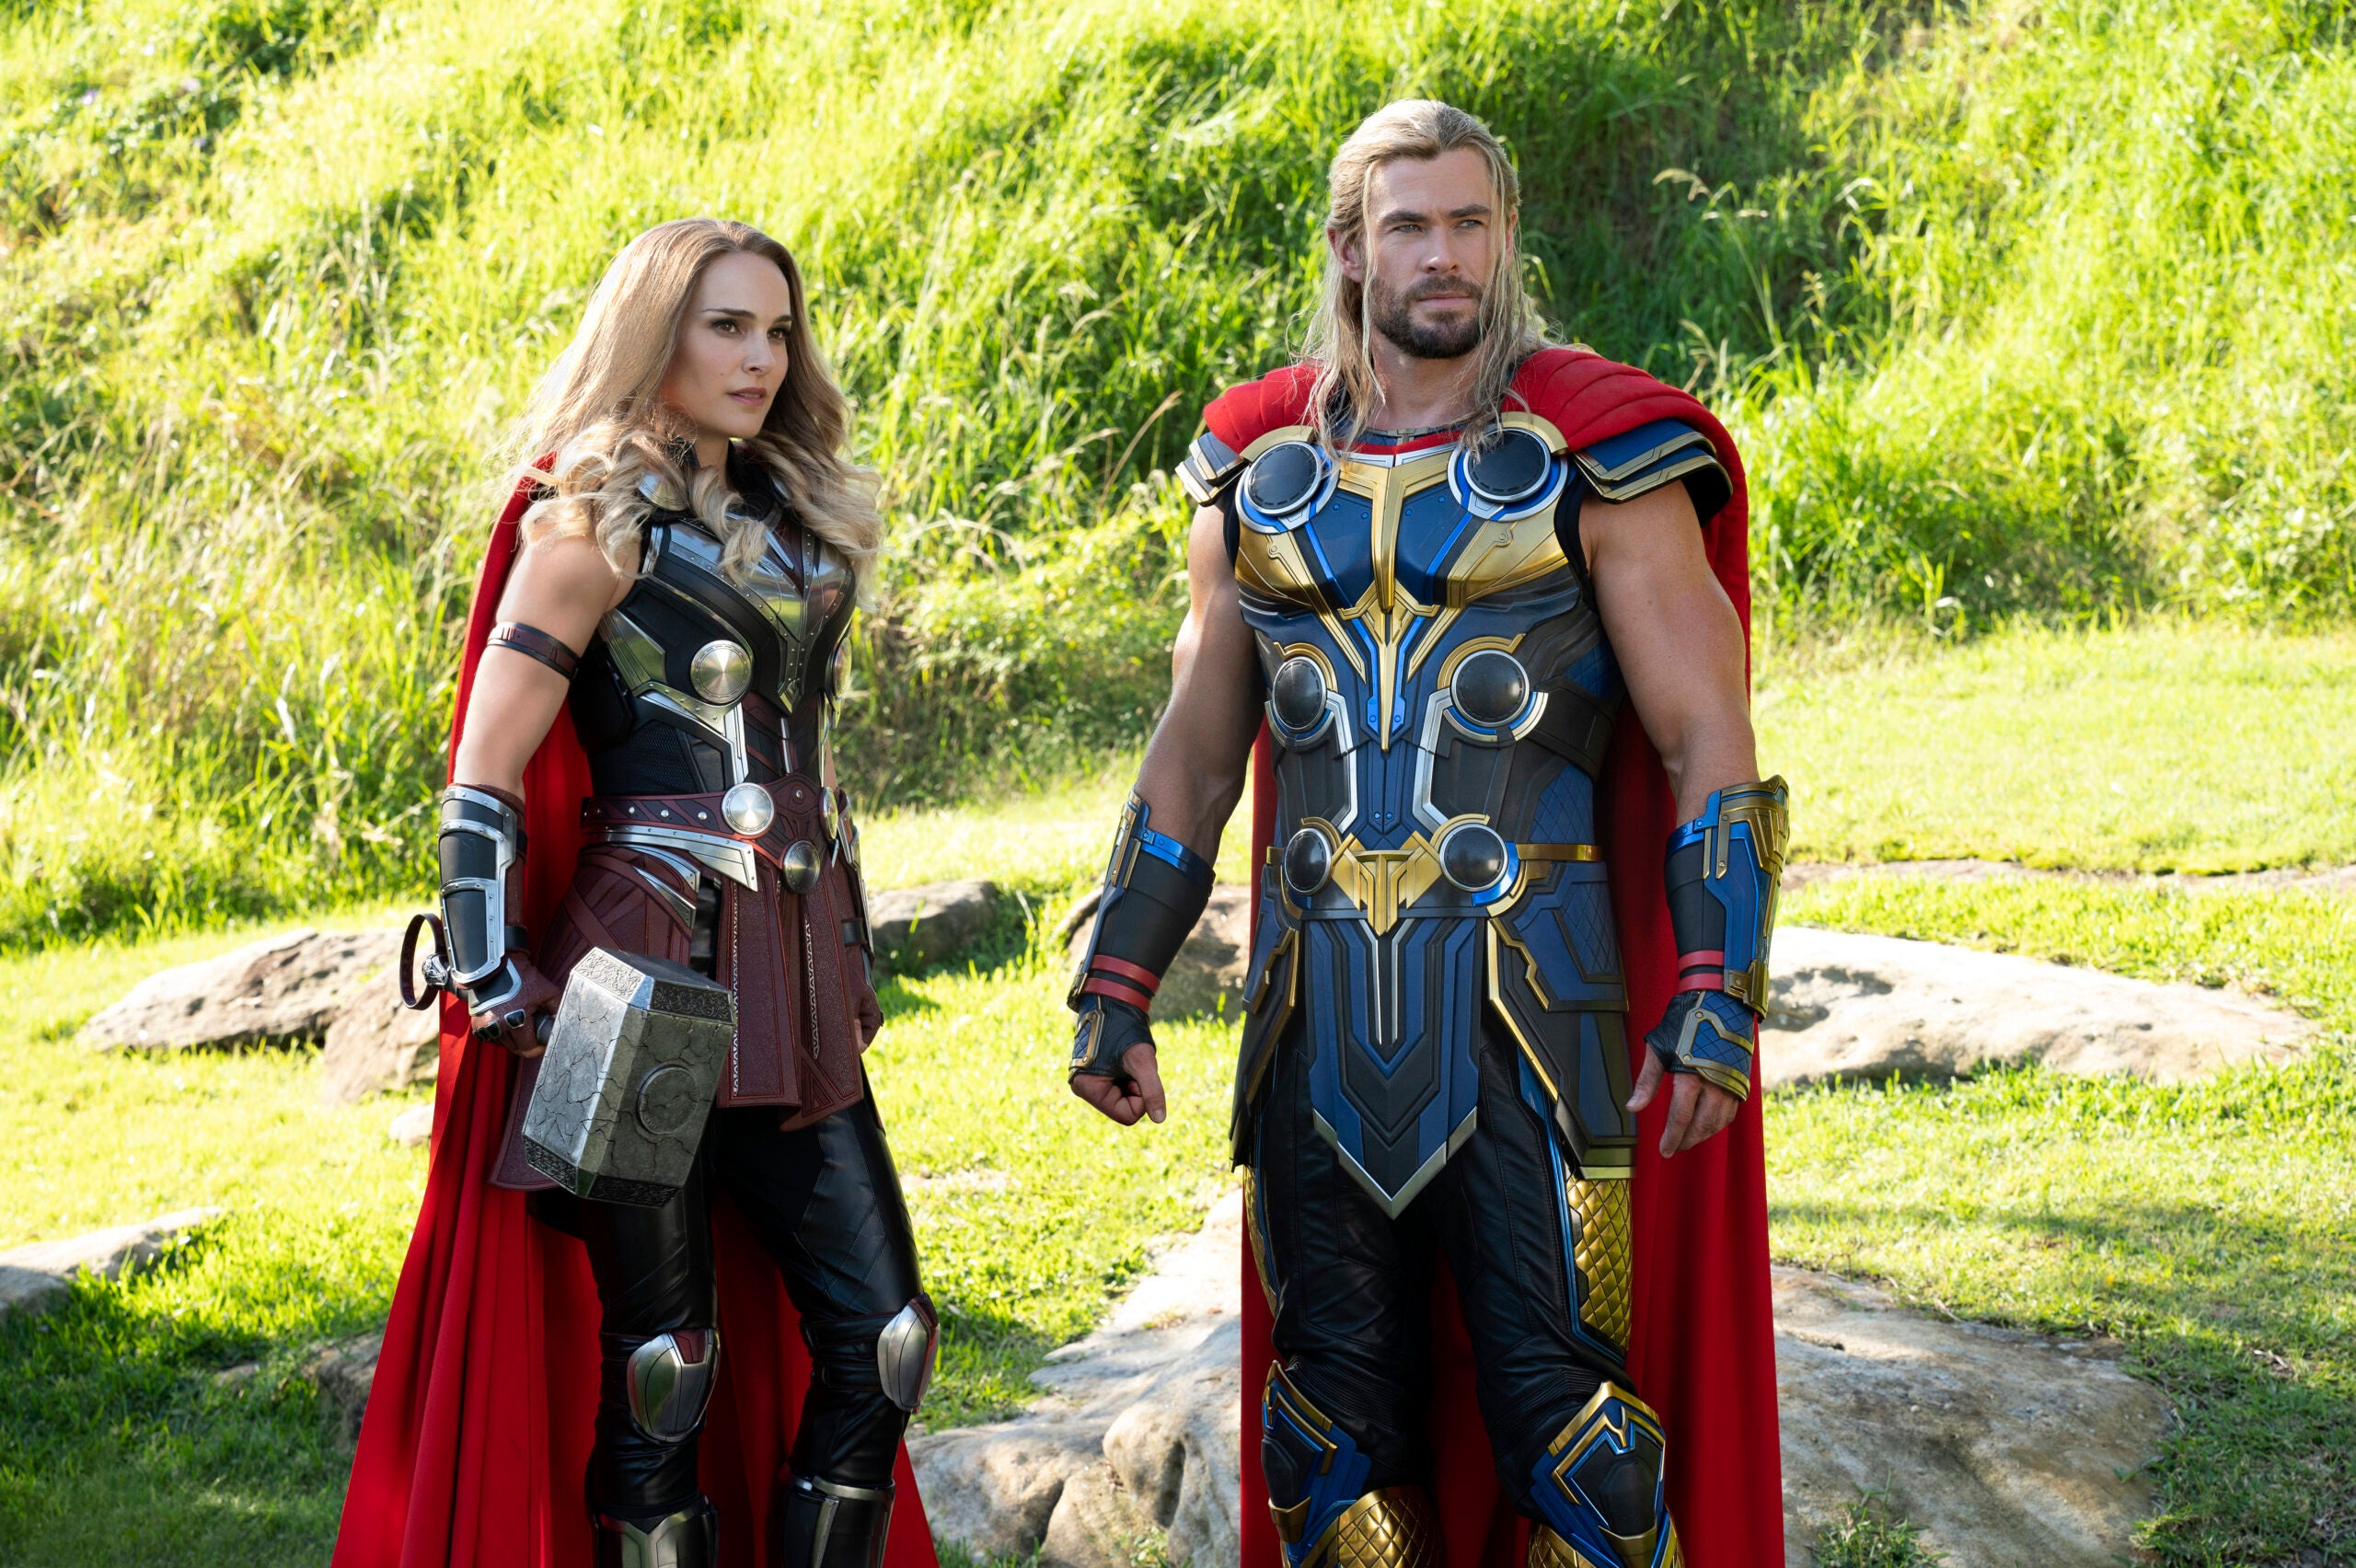 Natalie Portman and Chris Hemsworth in "Thor: Love and Thunder."